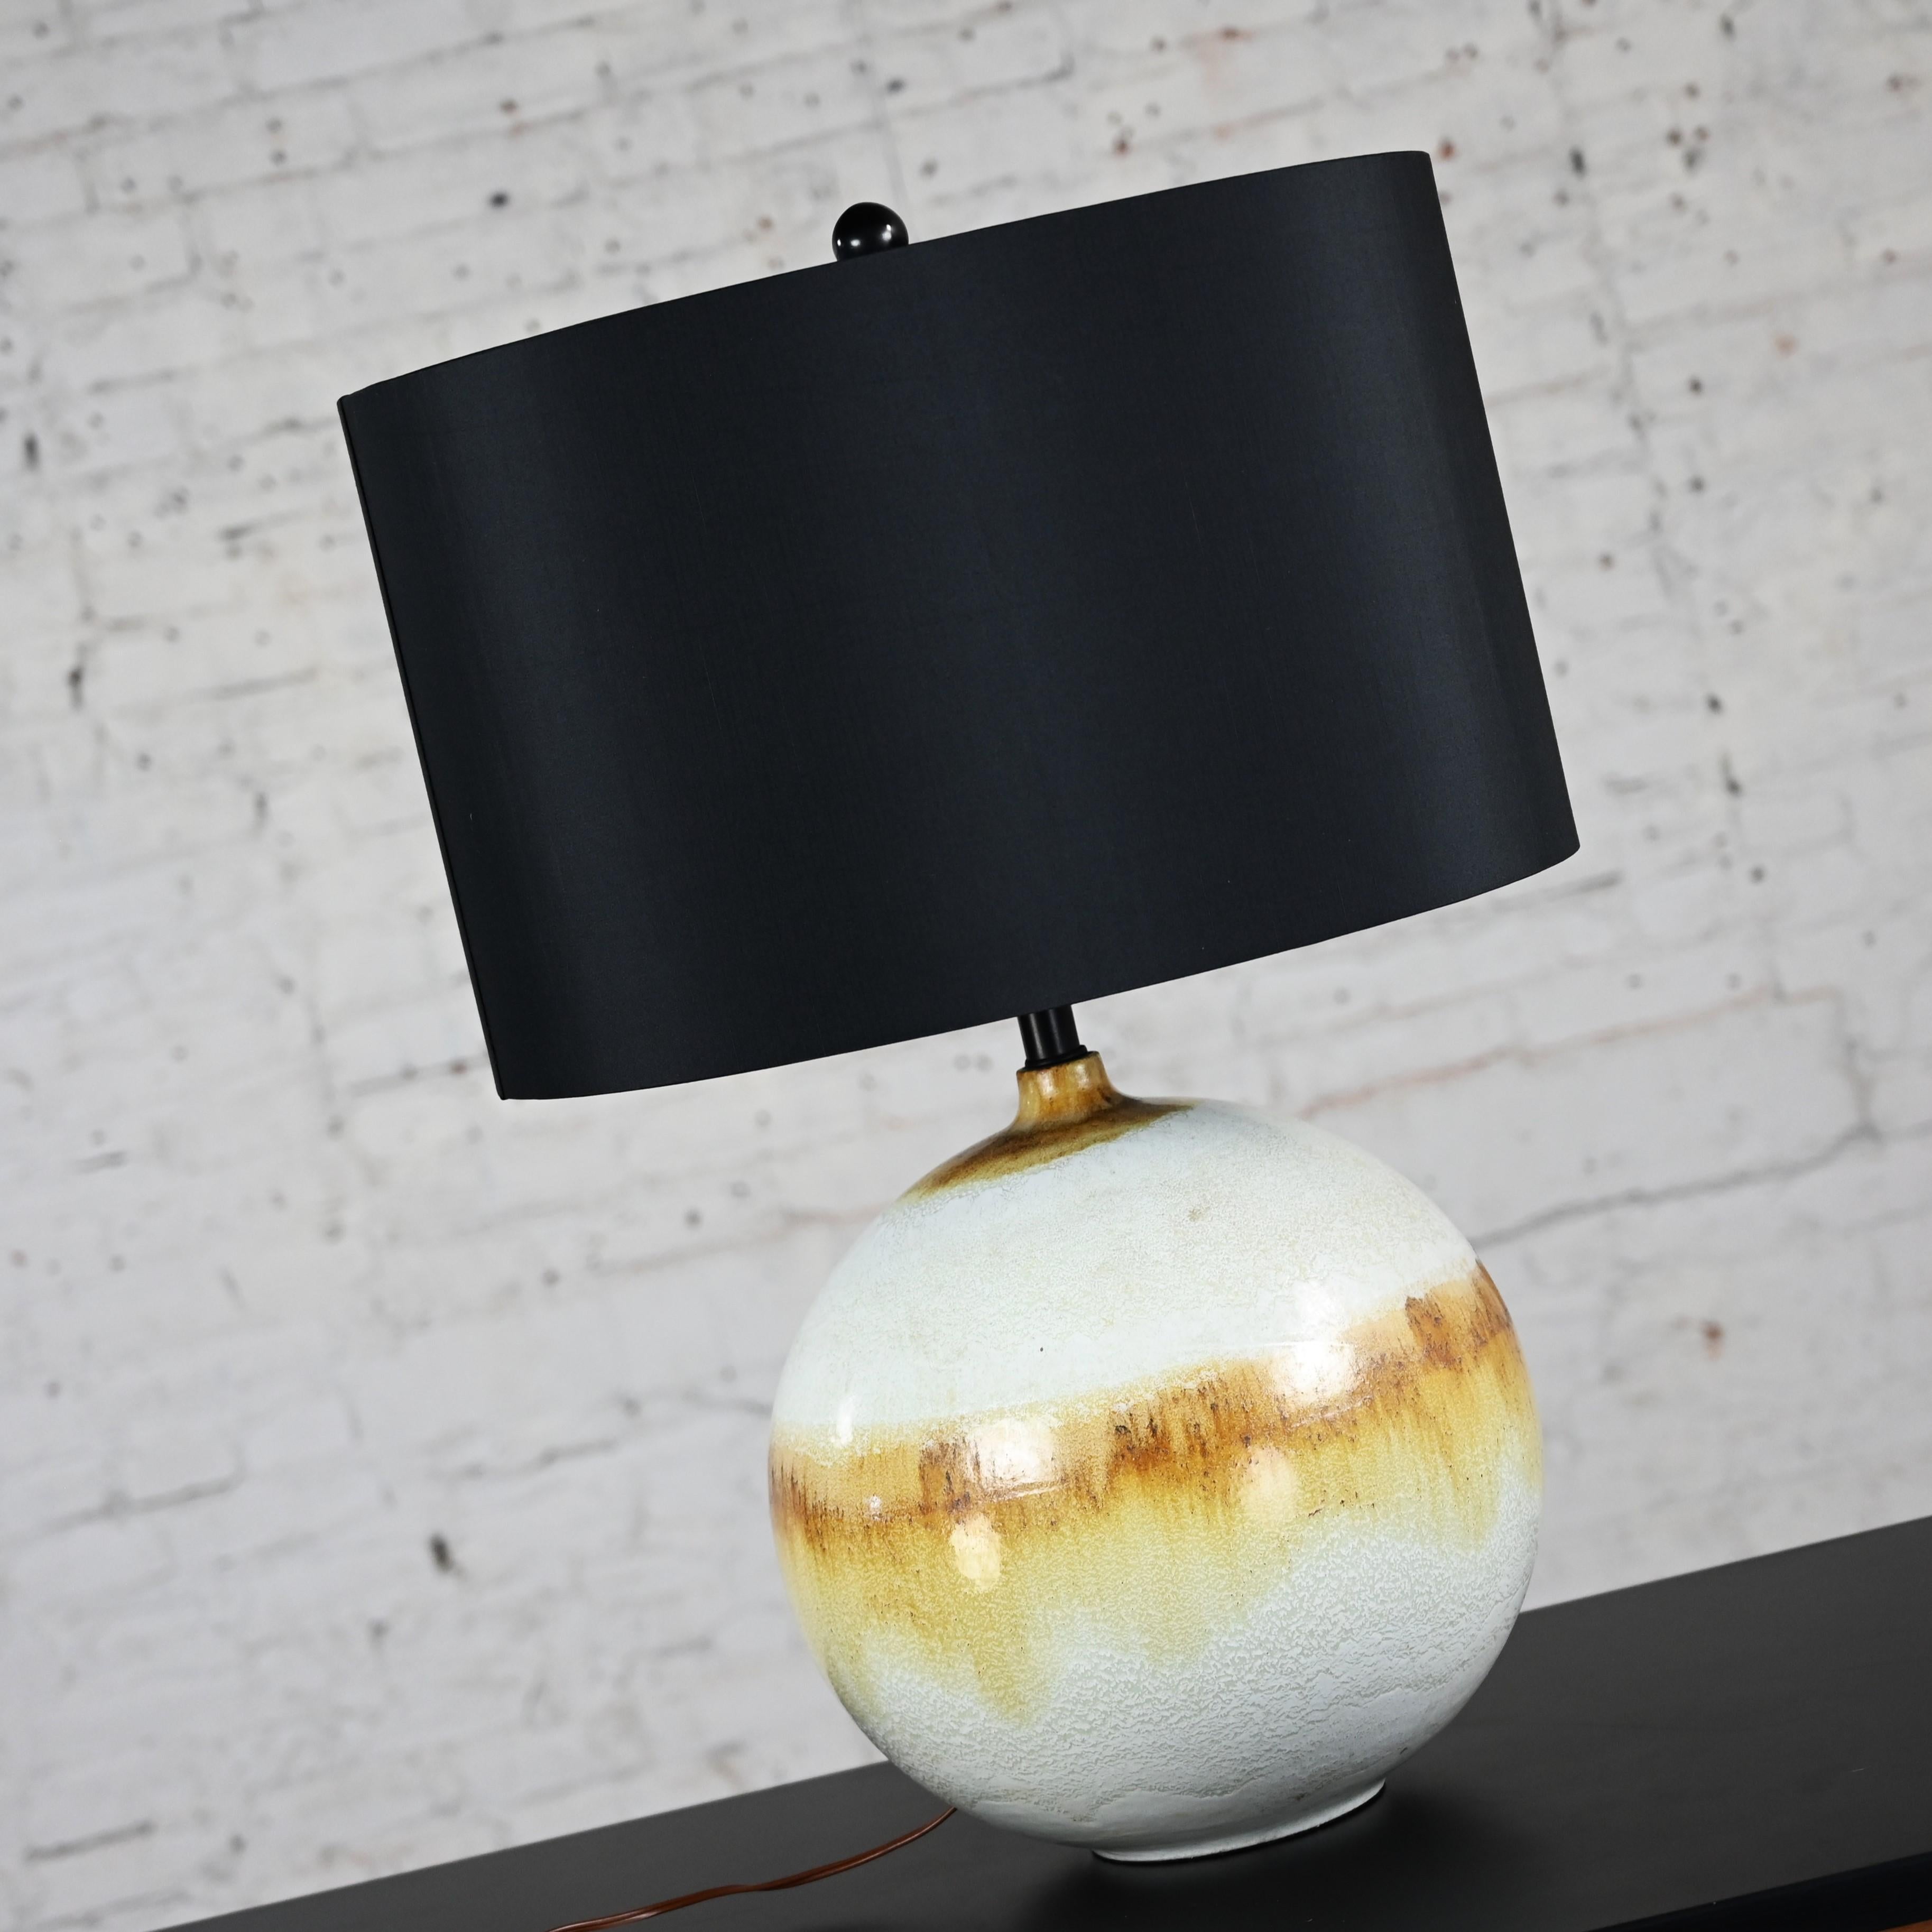 Mid-20th Century MCM Drip Glaze Ceramic Ball Lamp with New Black Shade For Sale 8